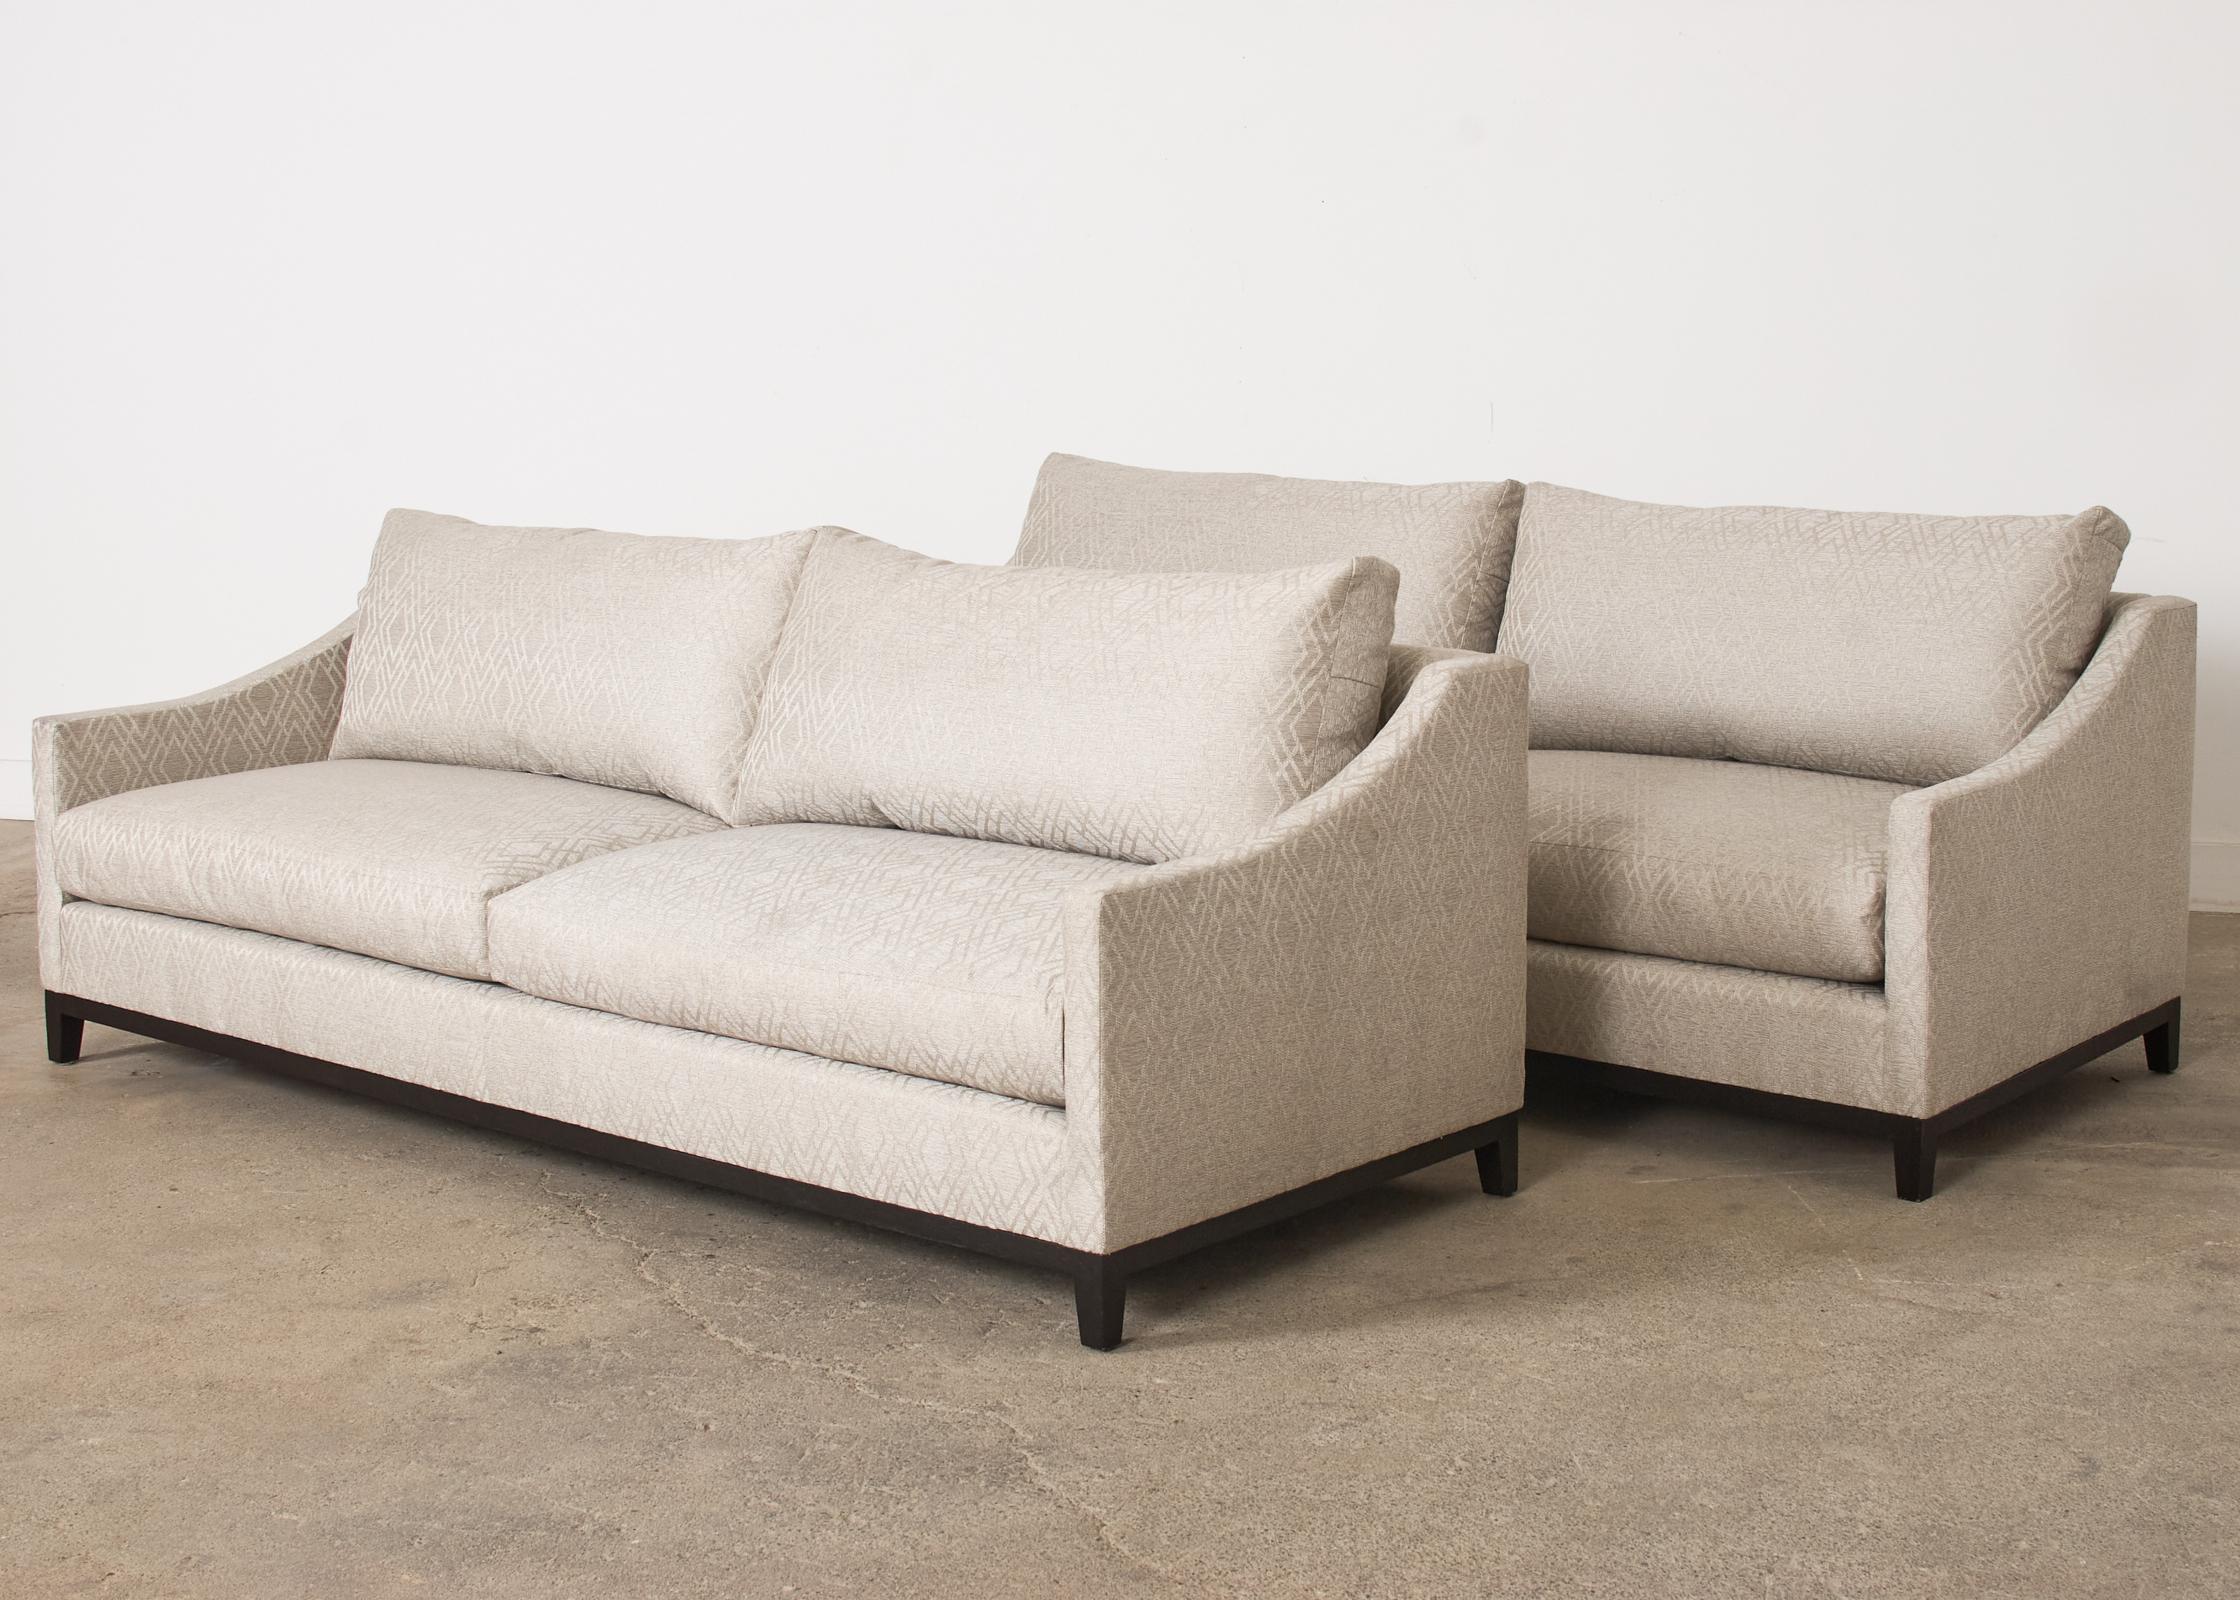 Hand-Crafted Pair of Bespoke Modern Sofas Atrributed to Gregorius Pineo  For Sale